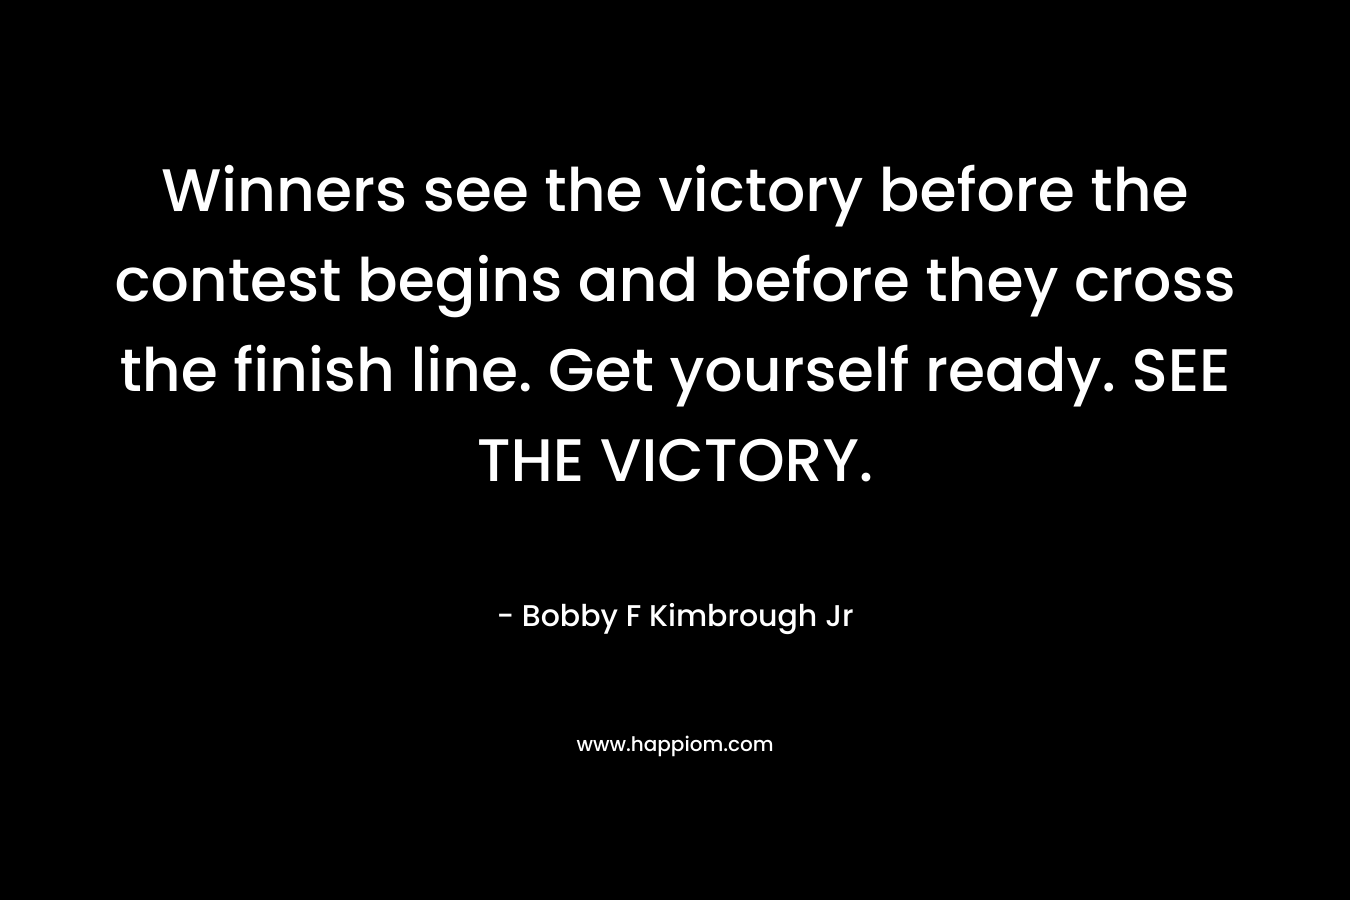 Winners see the victory before the contest begins and before they cross the finish line. Get yourself ready. SEE THE VICTORY.